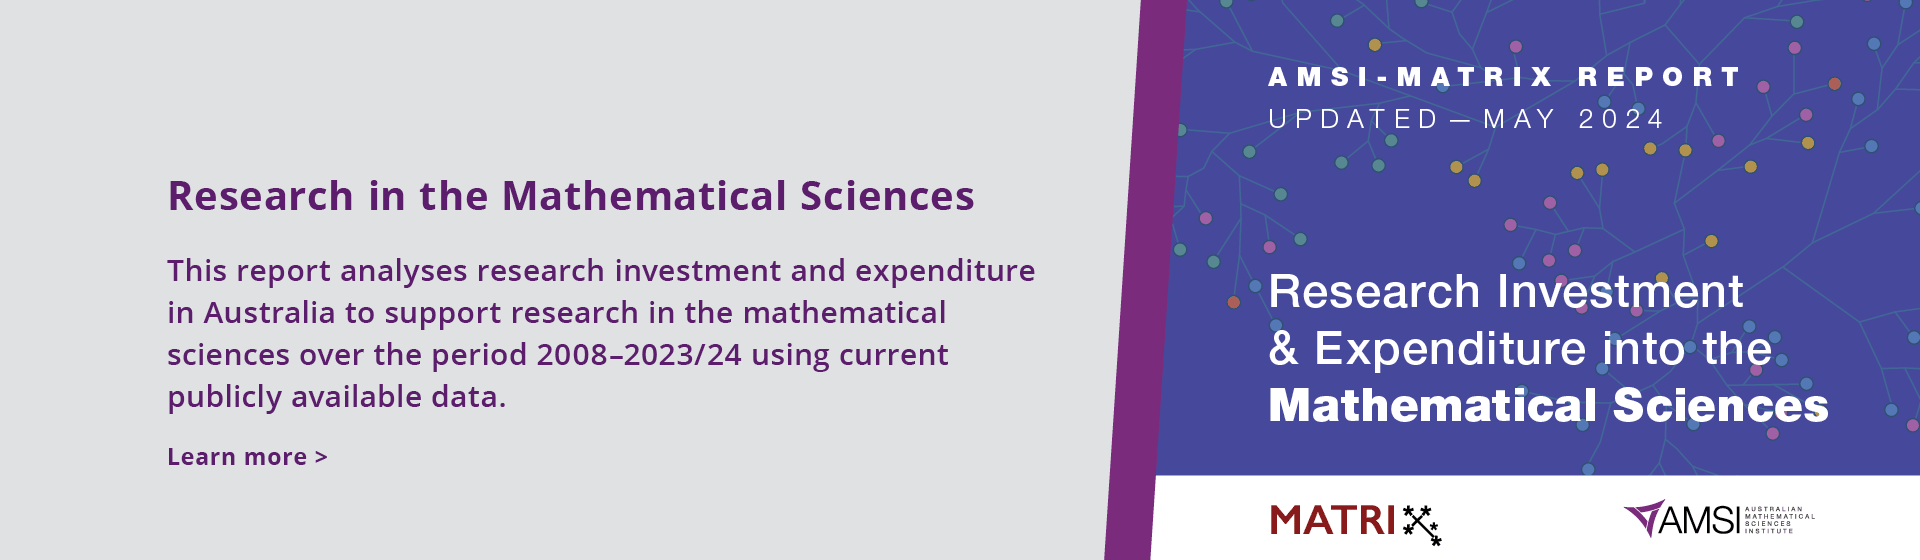 Research Investment and Expenditure into the Mathematical Sciences 2024